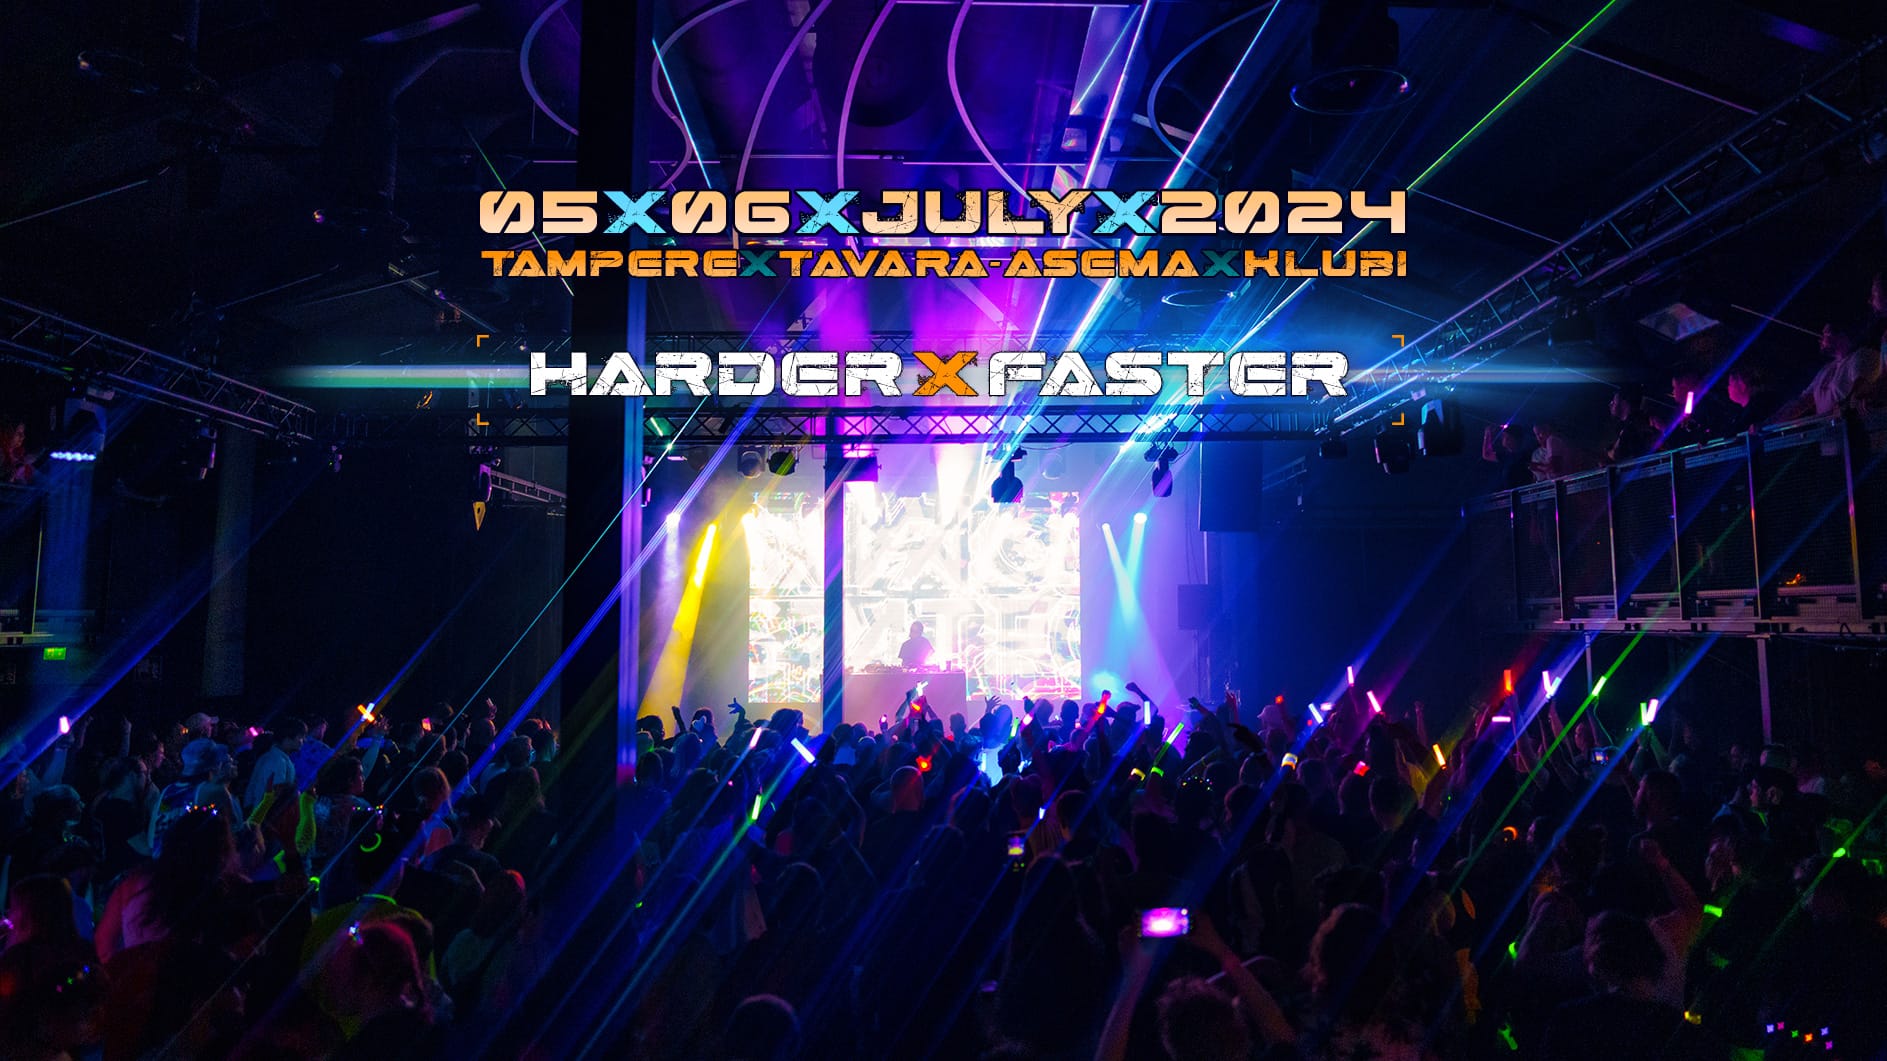 Thank you HARDER X FASTER! (with Artists' greetings)